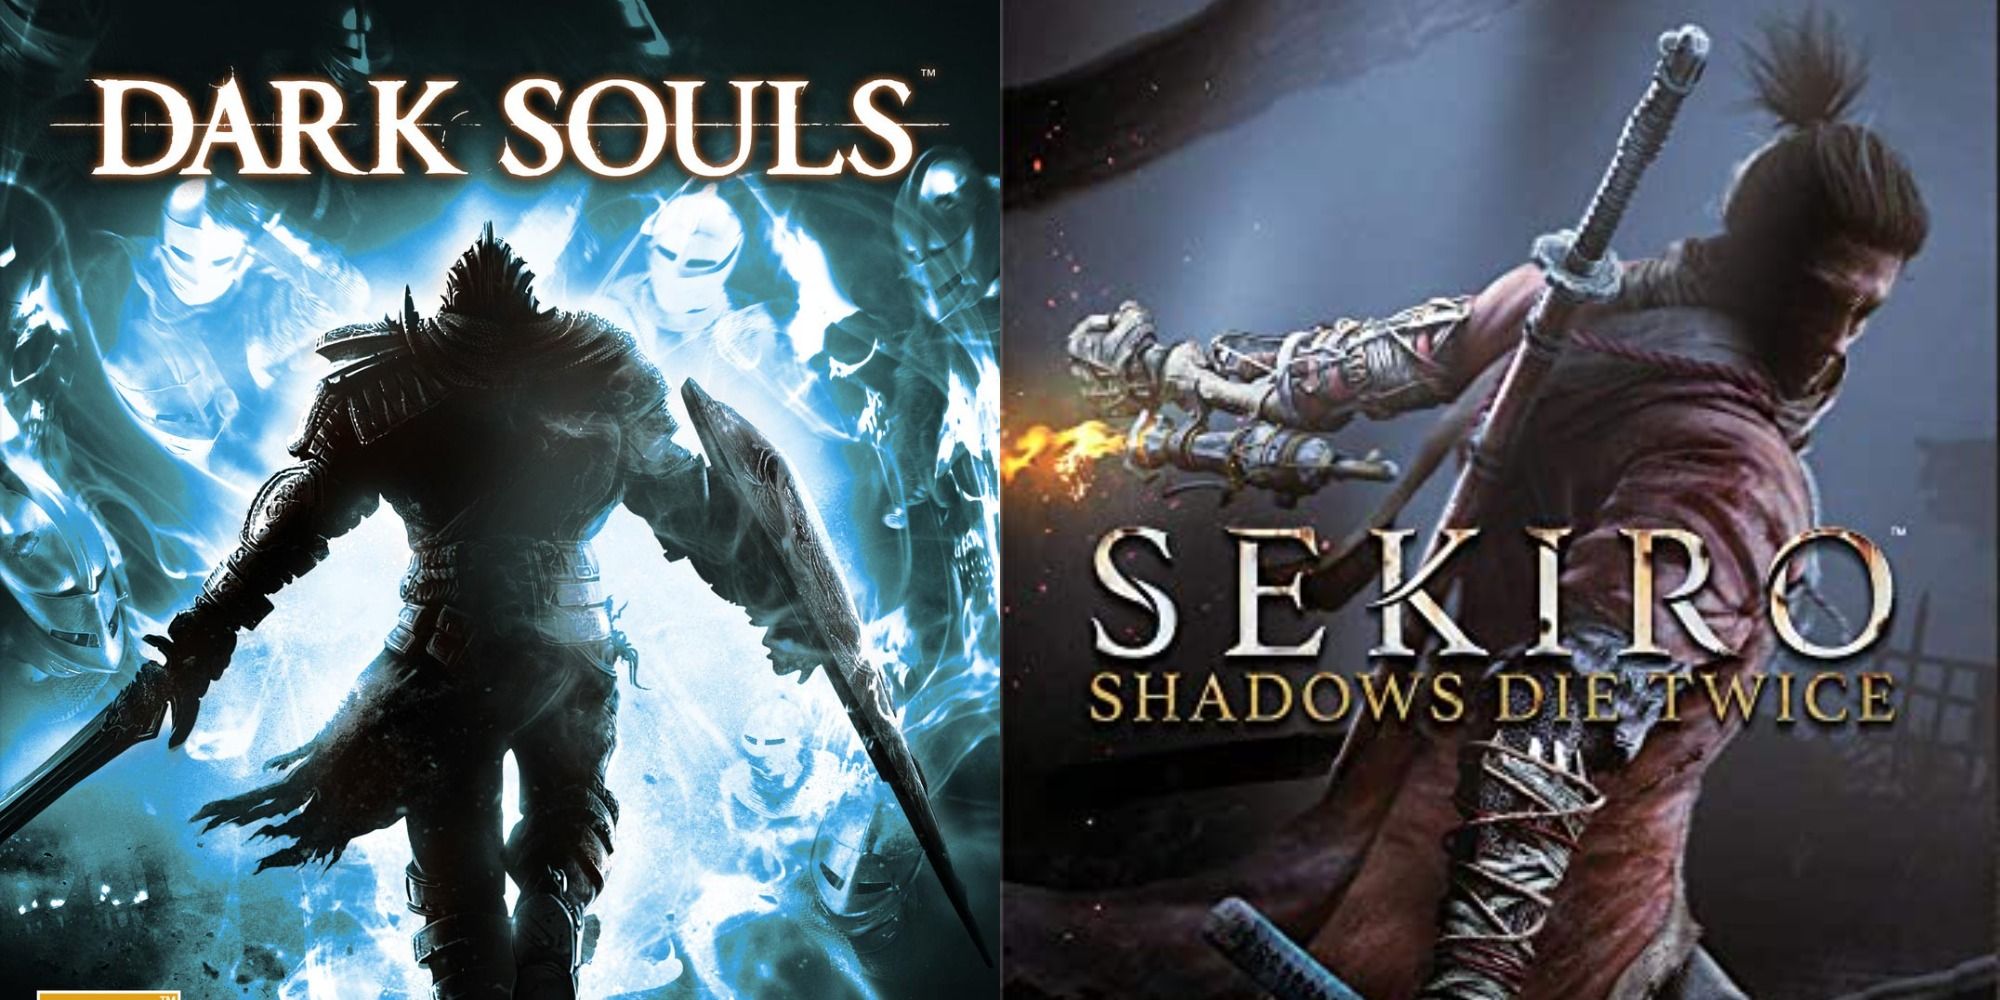 Split image showing the covers of Dark Souls and Sekiro Shadows Dies Twice